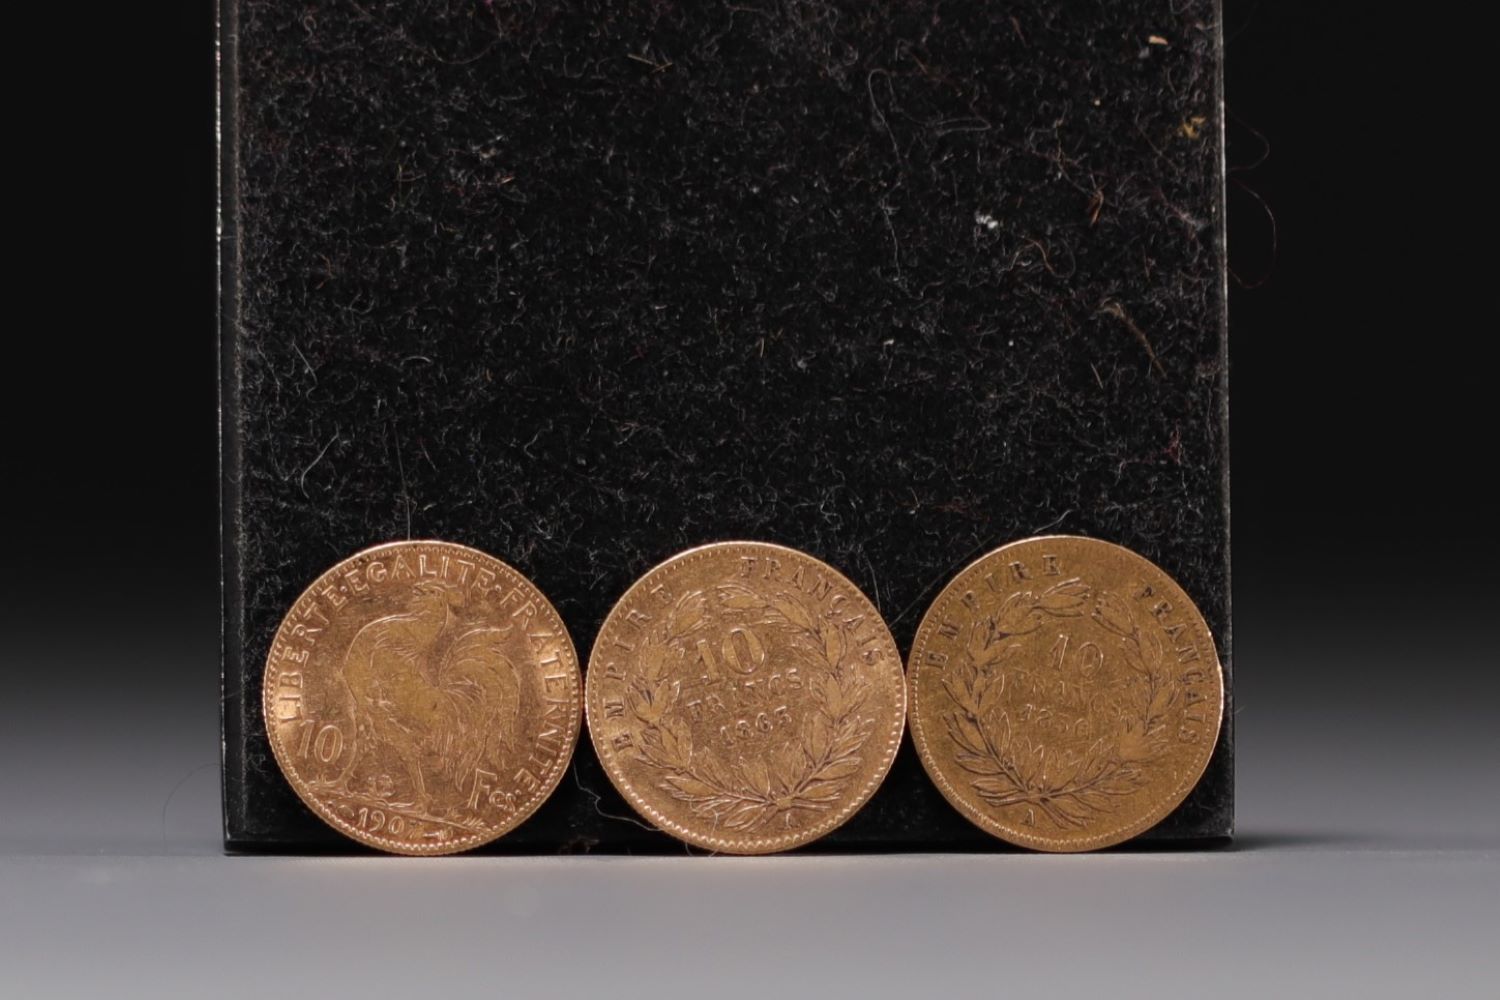 Set of three 10 Frs Gold coins, a Marianne from 1907 and two 10 Frs Napoleon III from 1826 and 1863. - Image 2 of 2